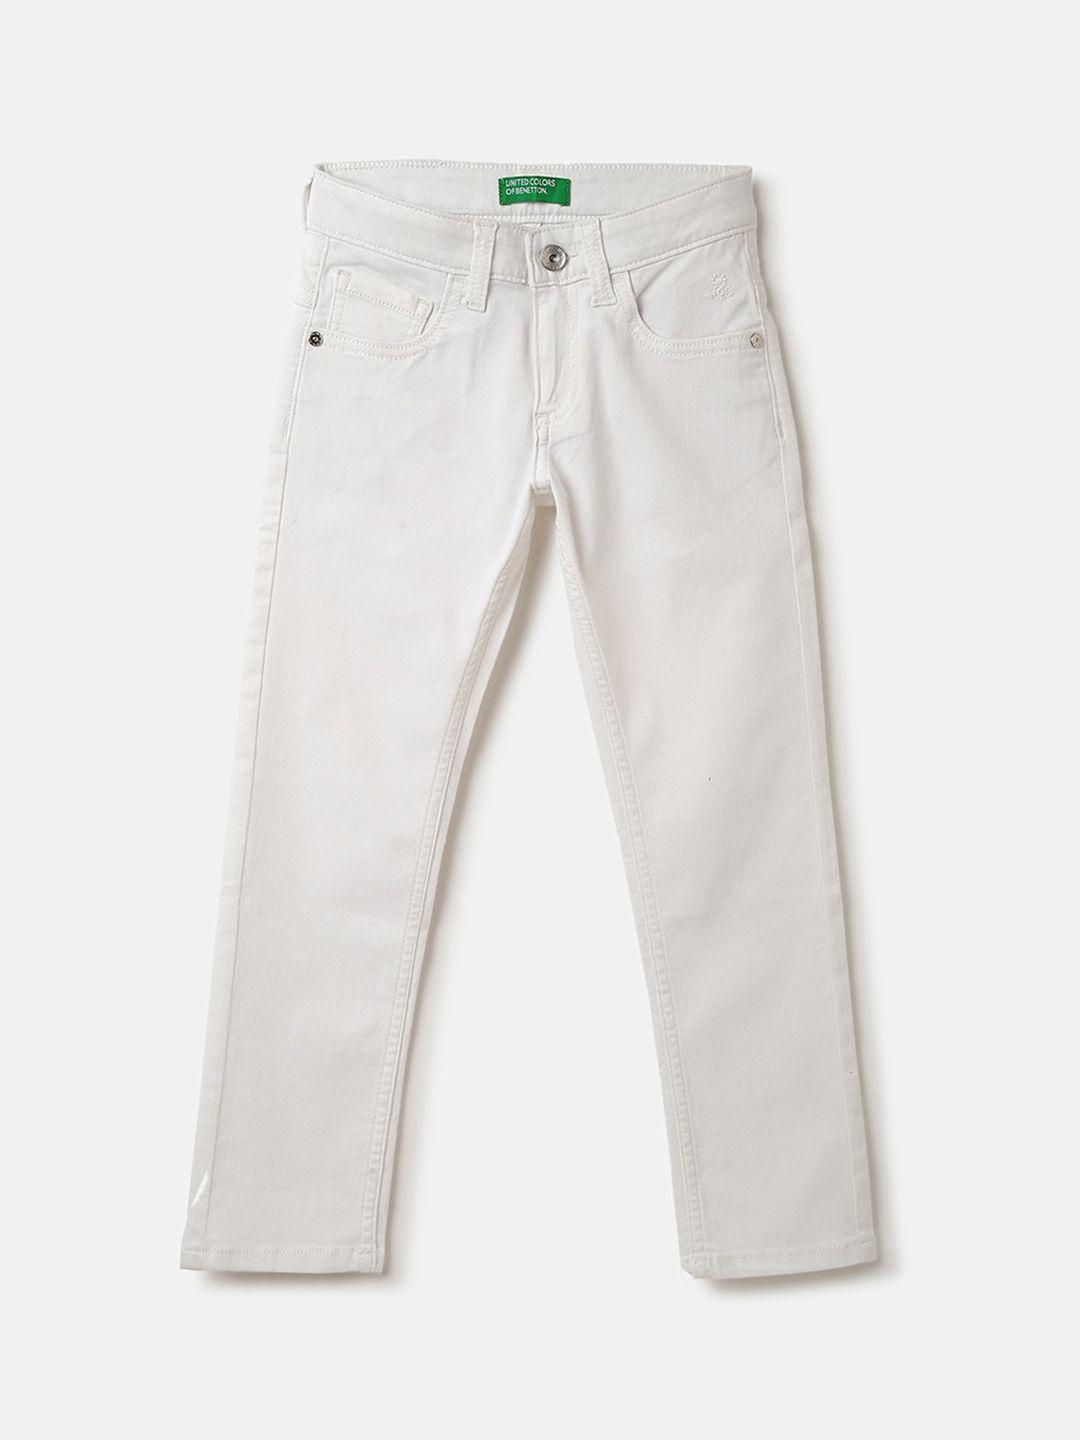 united colors of benetton boys slim fit jeans